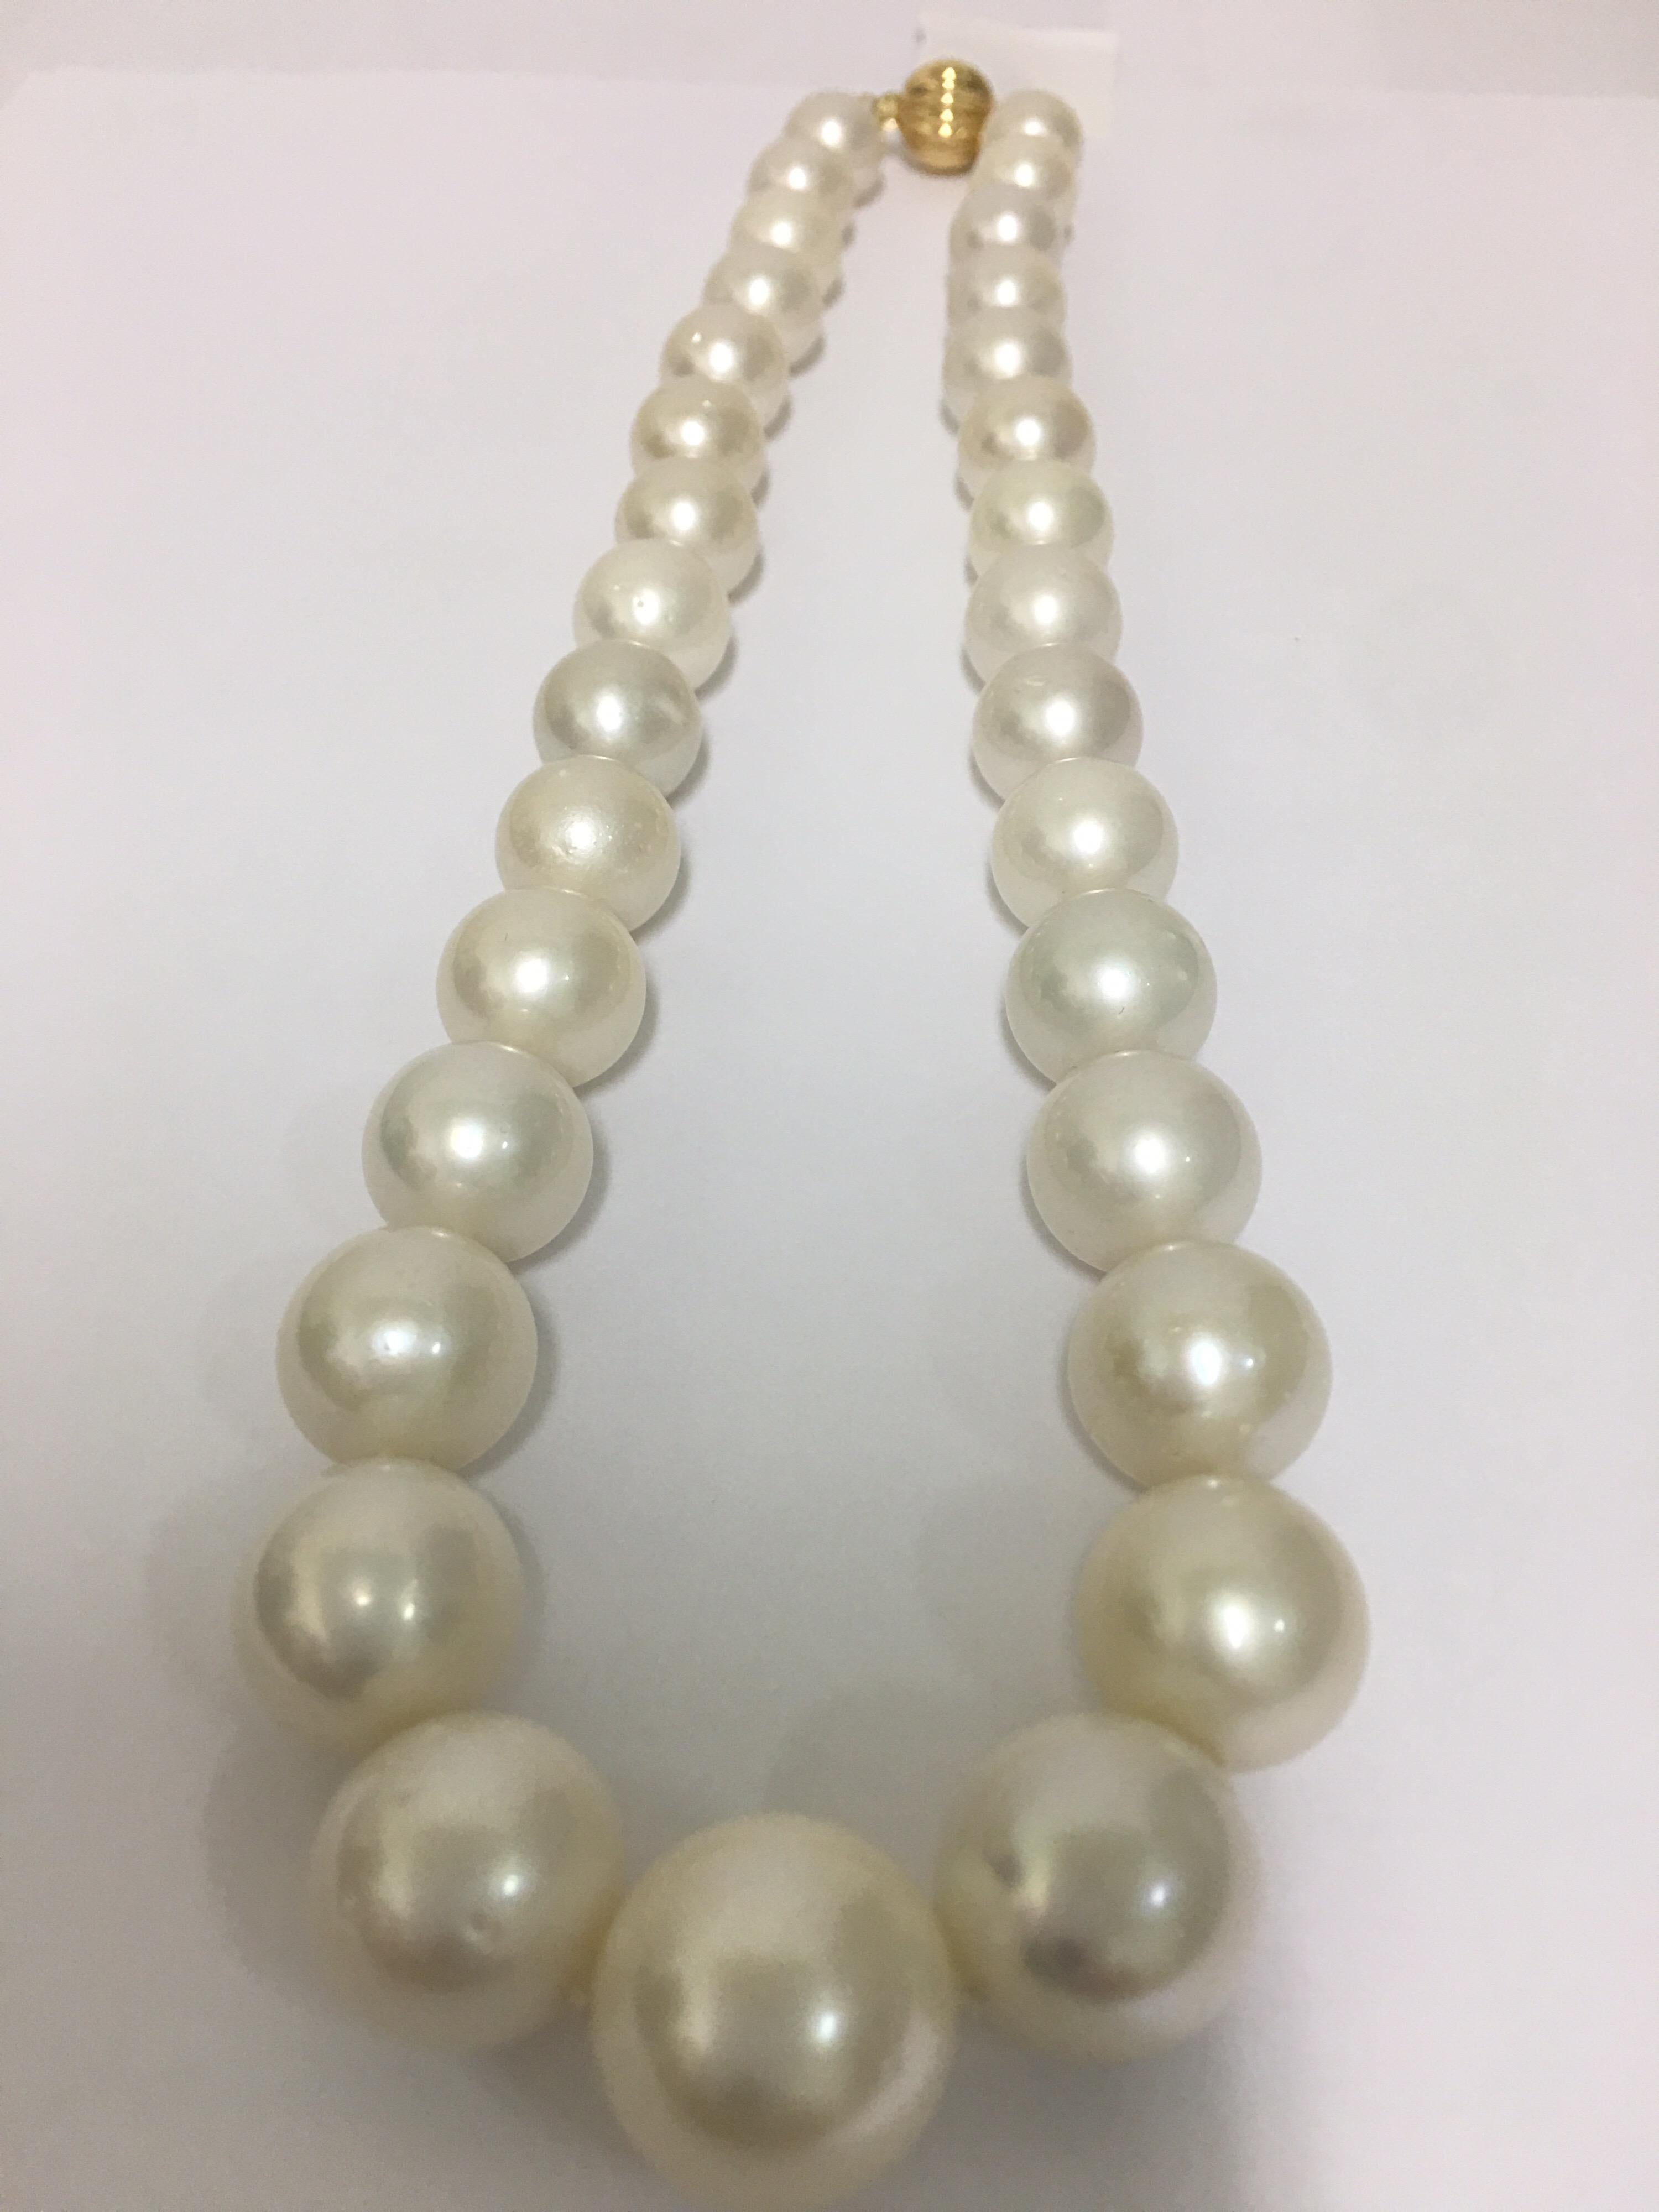 Natural South Sea Pearl with 14K Yellow Gold Clasp.
Size of the pearl are 12 MM-16.8MM
All pearl has Birthmark, Help you to find its natural Pearl.
Length is 19 Inches